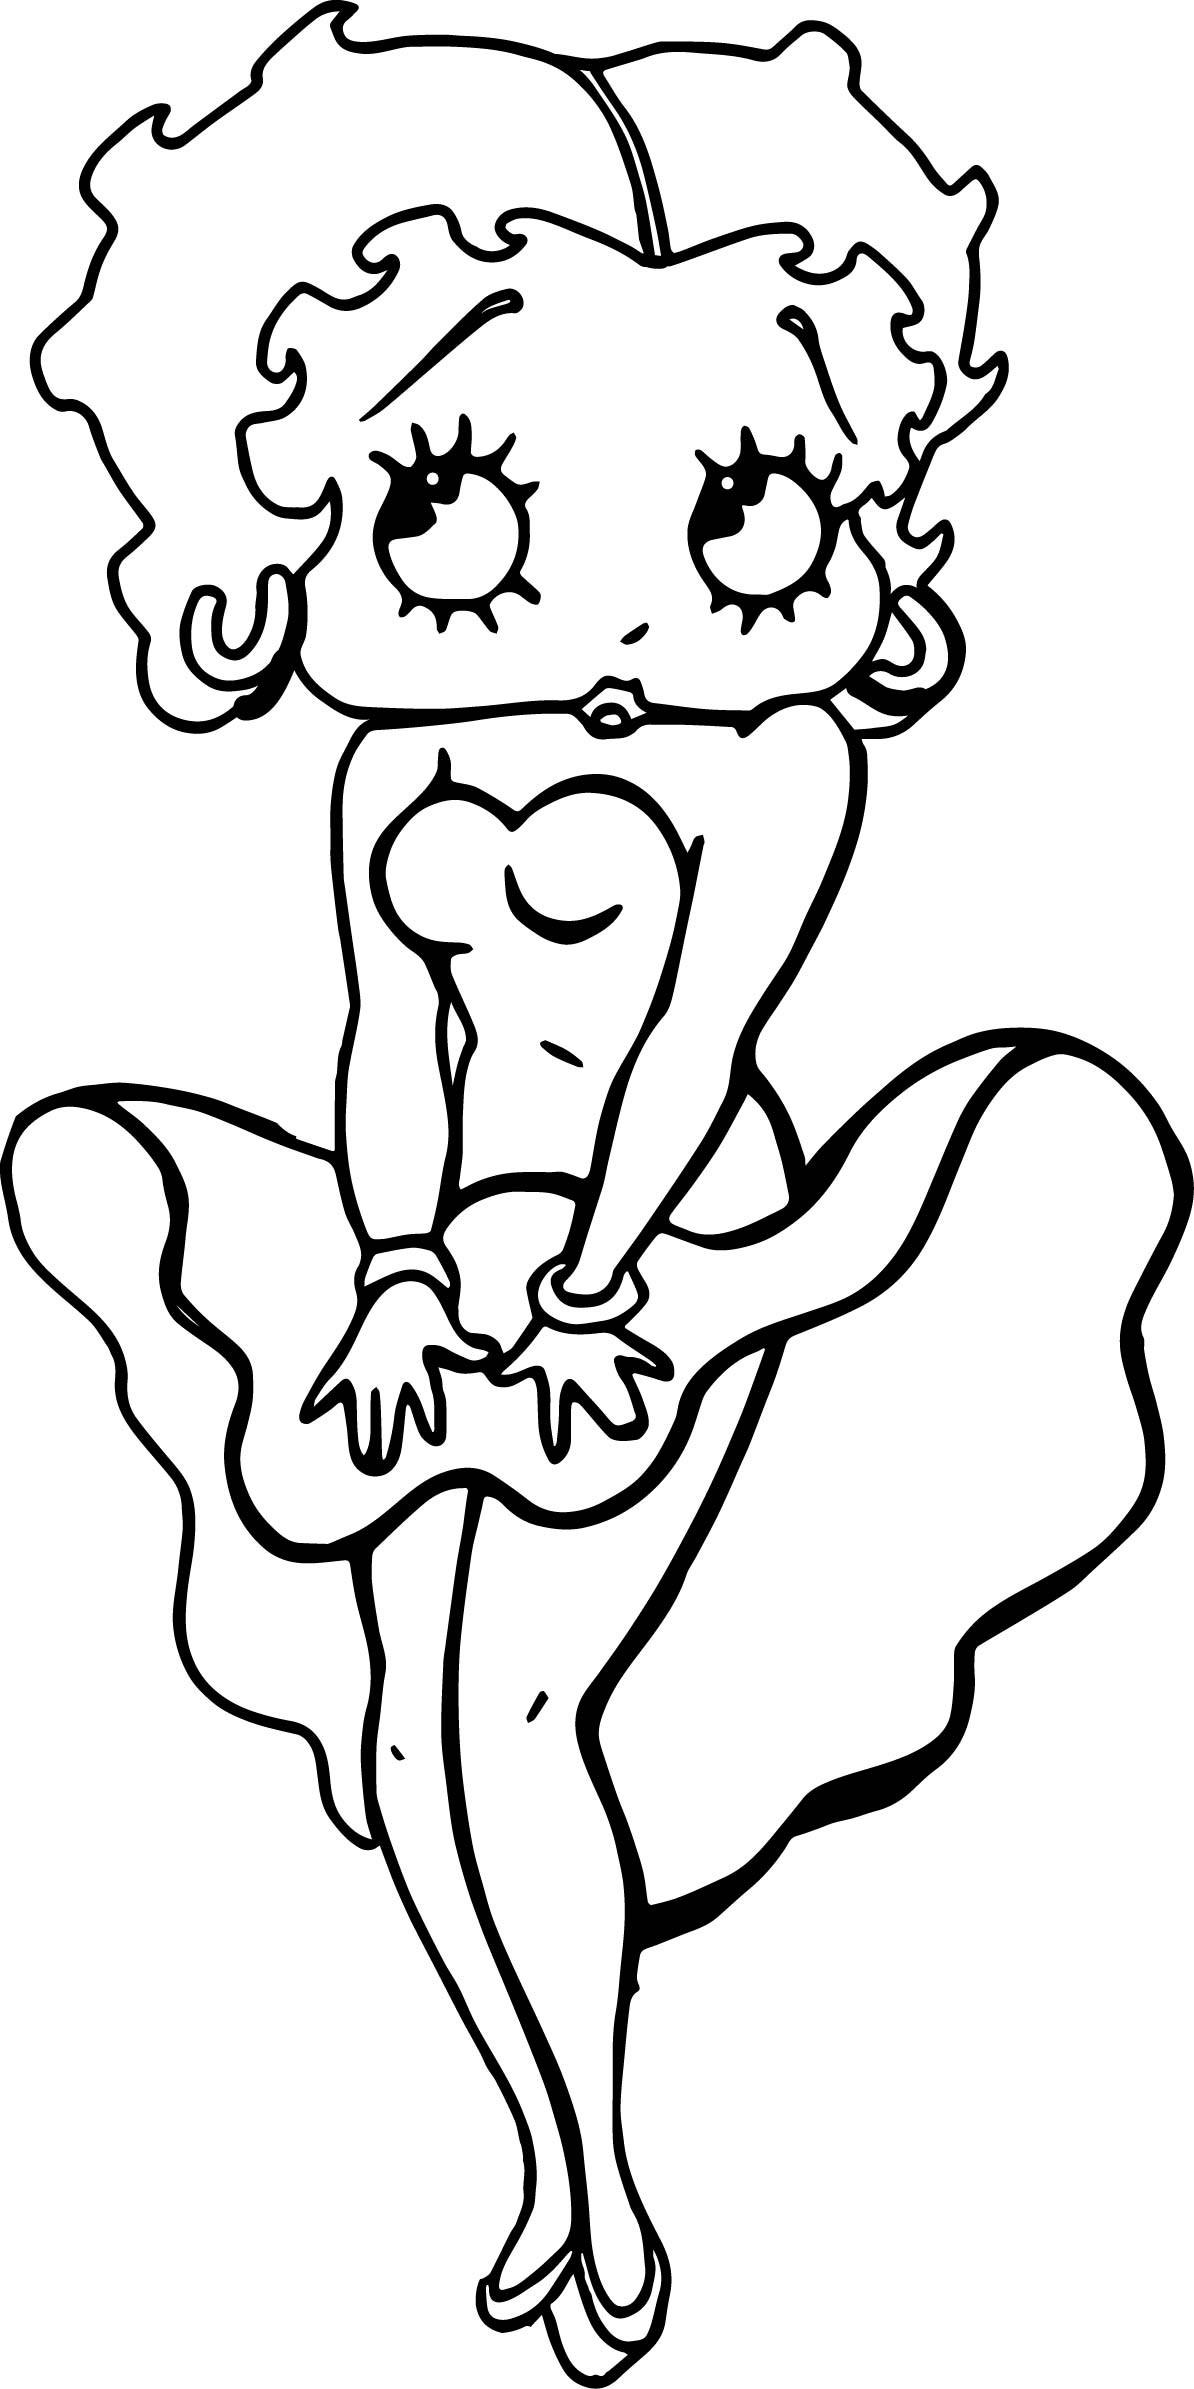 Betty Boop Coloring Pages At GetColorings Free Printable Colorings Pages To Print And Color